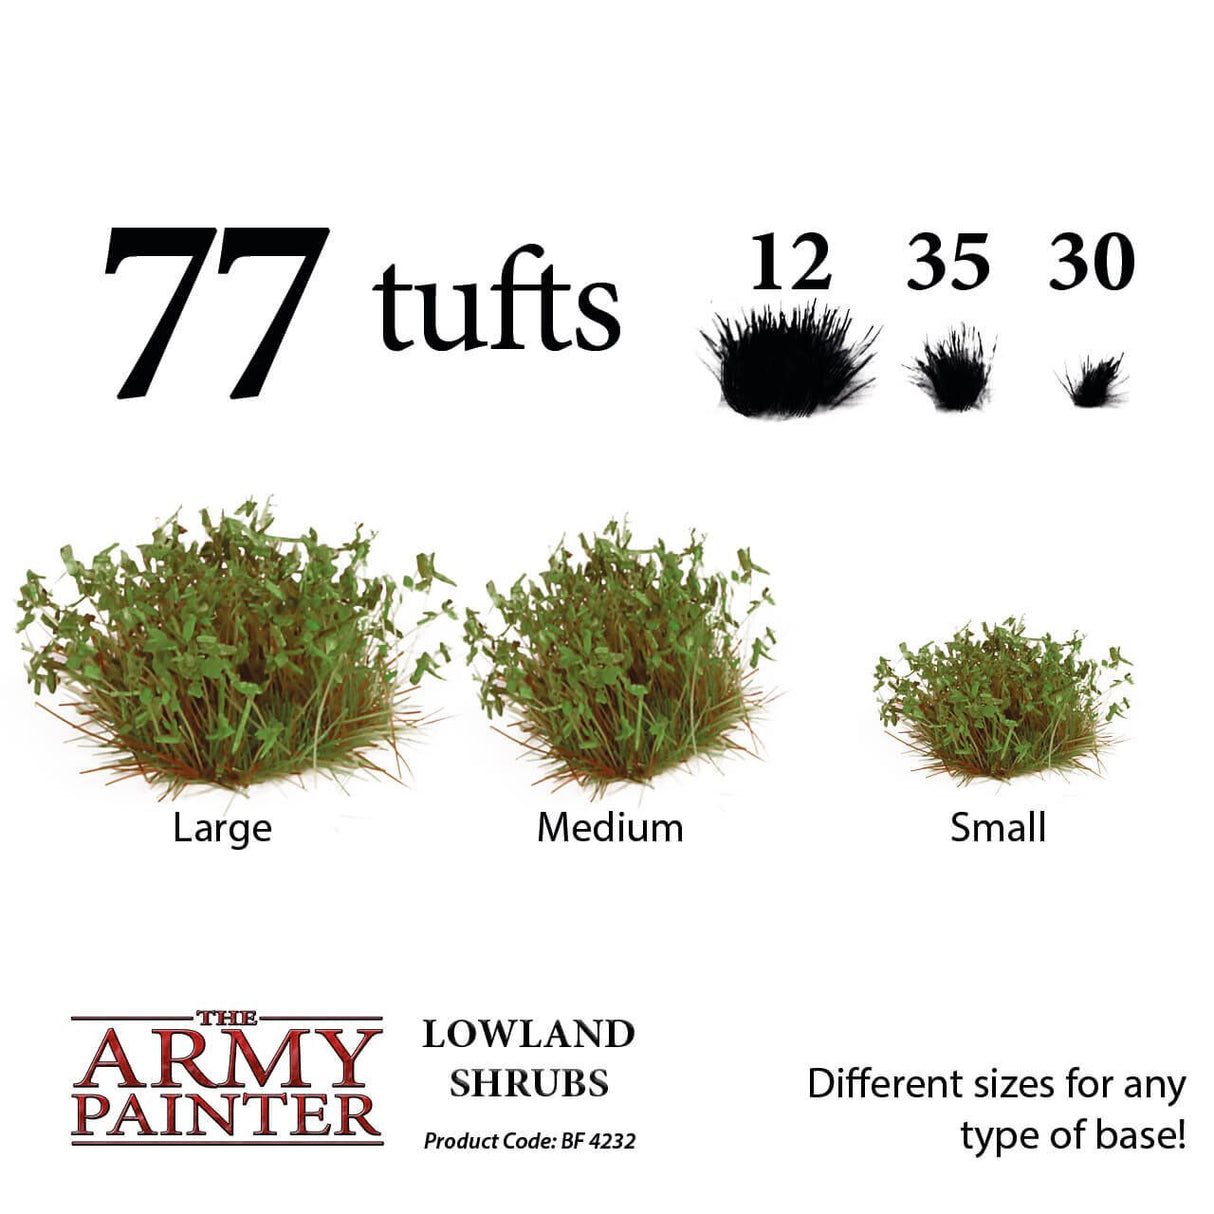 Army Painter BF4232 Lowland Shrubs The Army Painter TRAINS - SCENERY